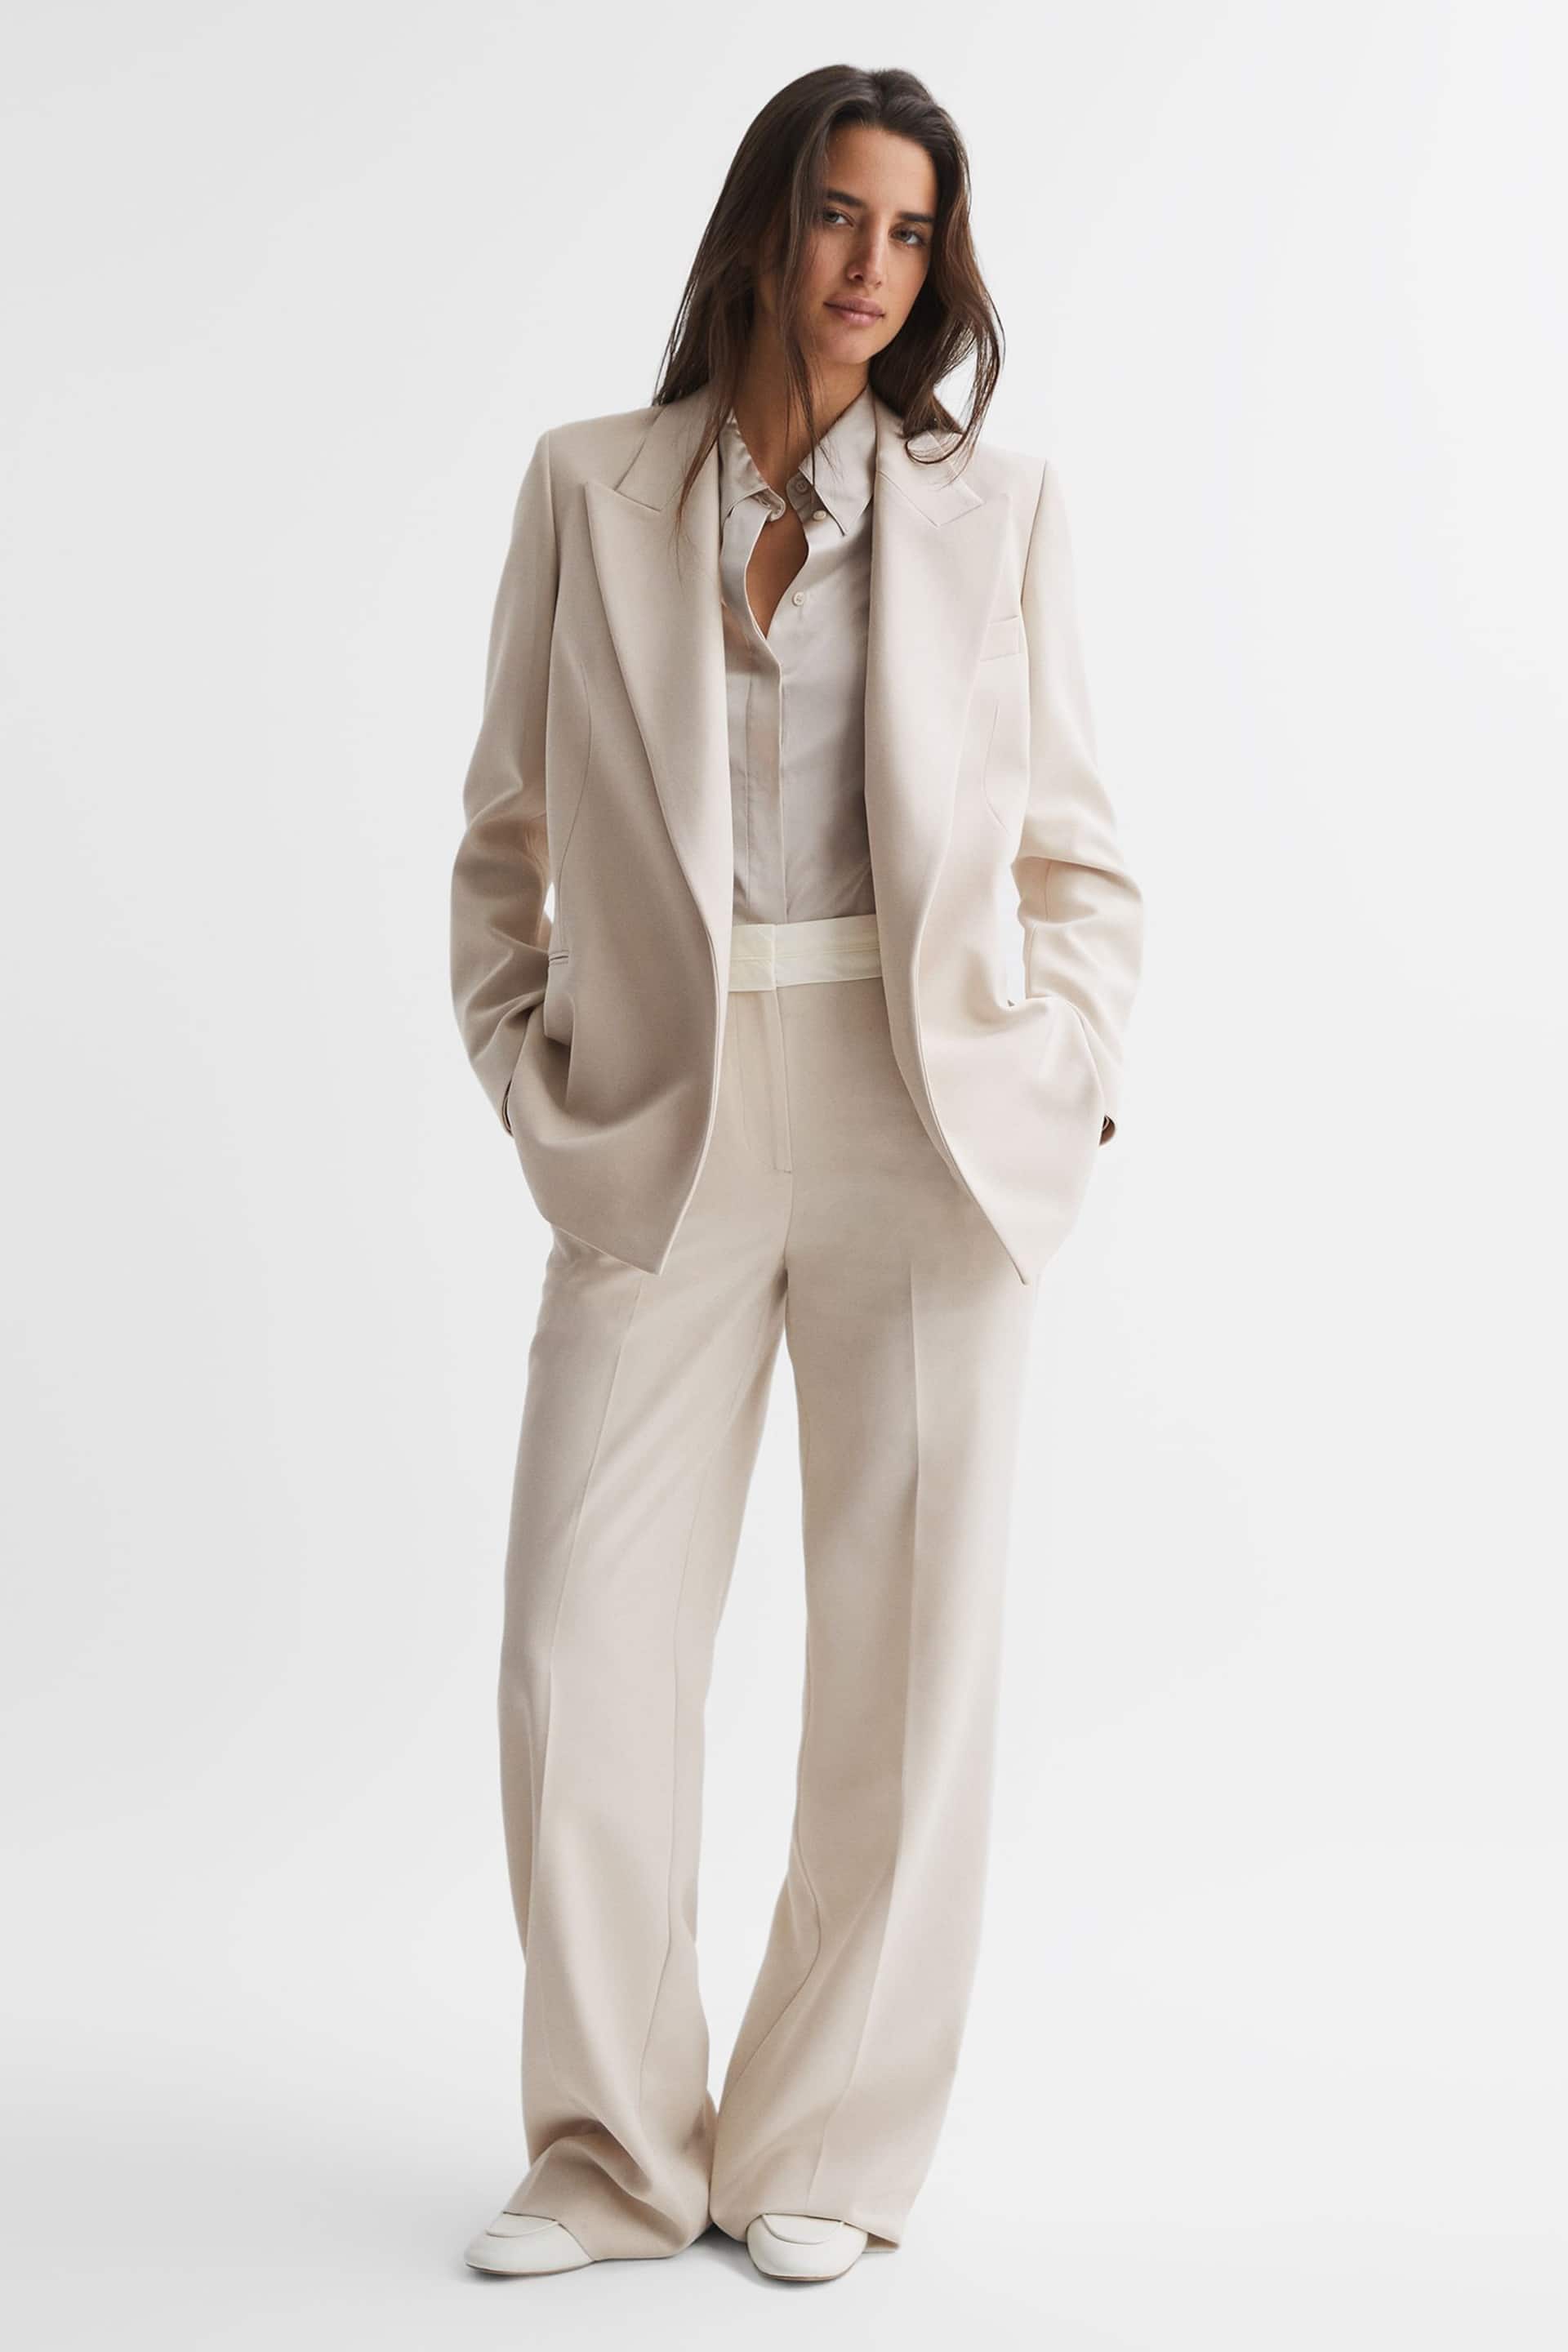 Reiss Neutral Maya Petite Tailored Fit Single Breasted Suit Blazer - Image 1 of 6